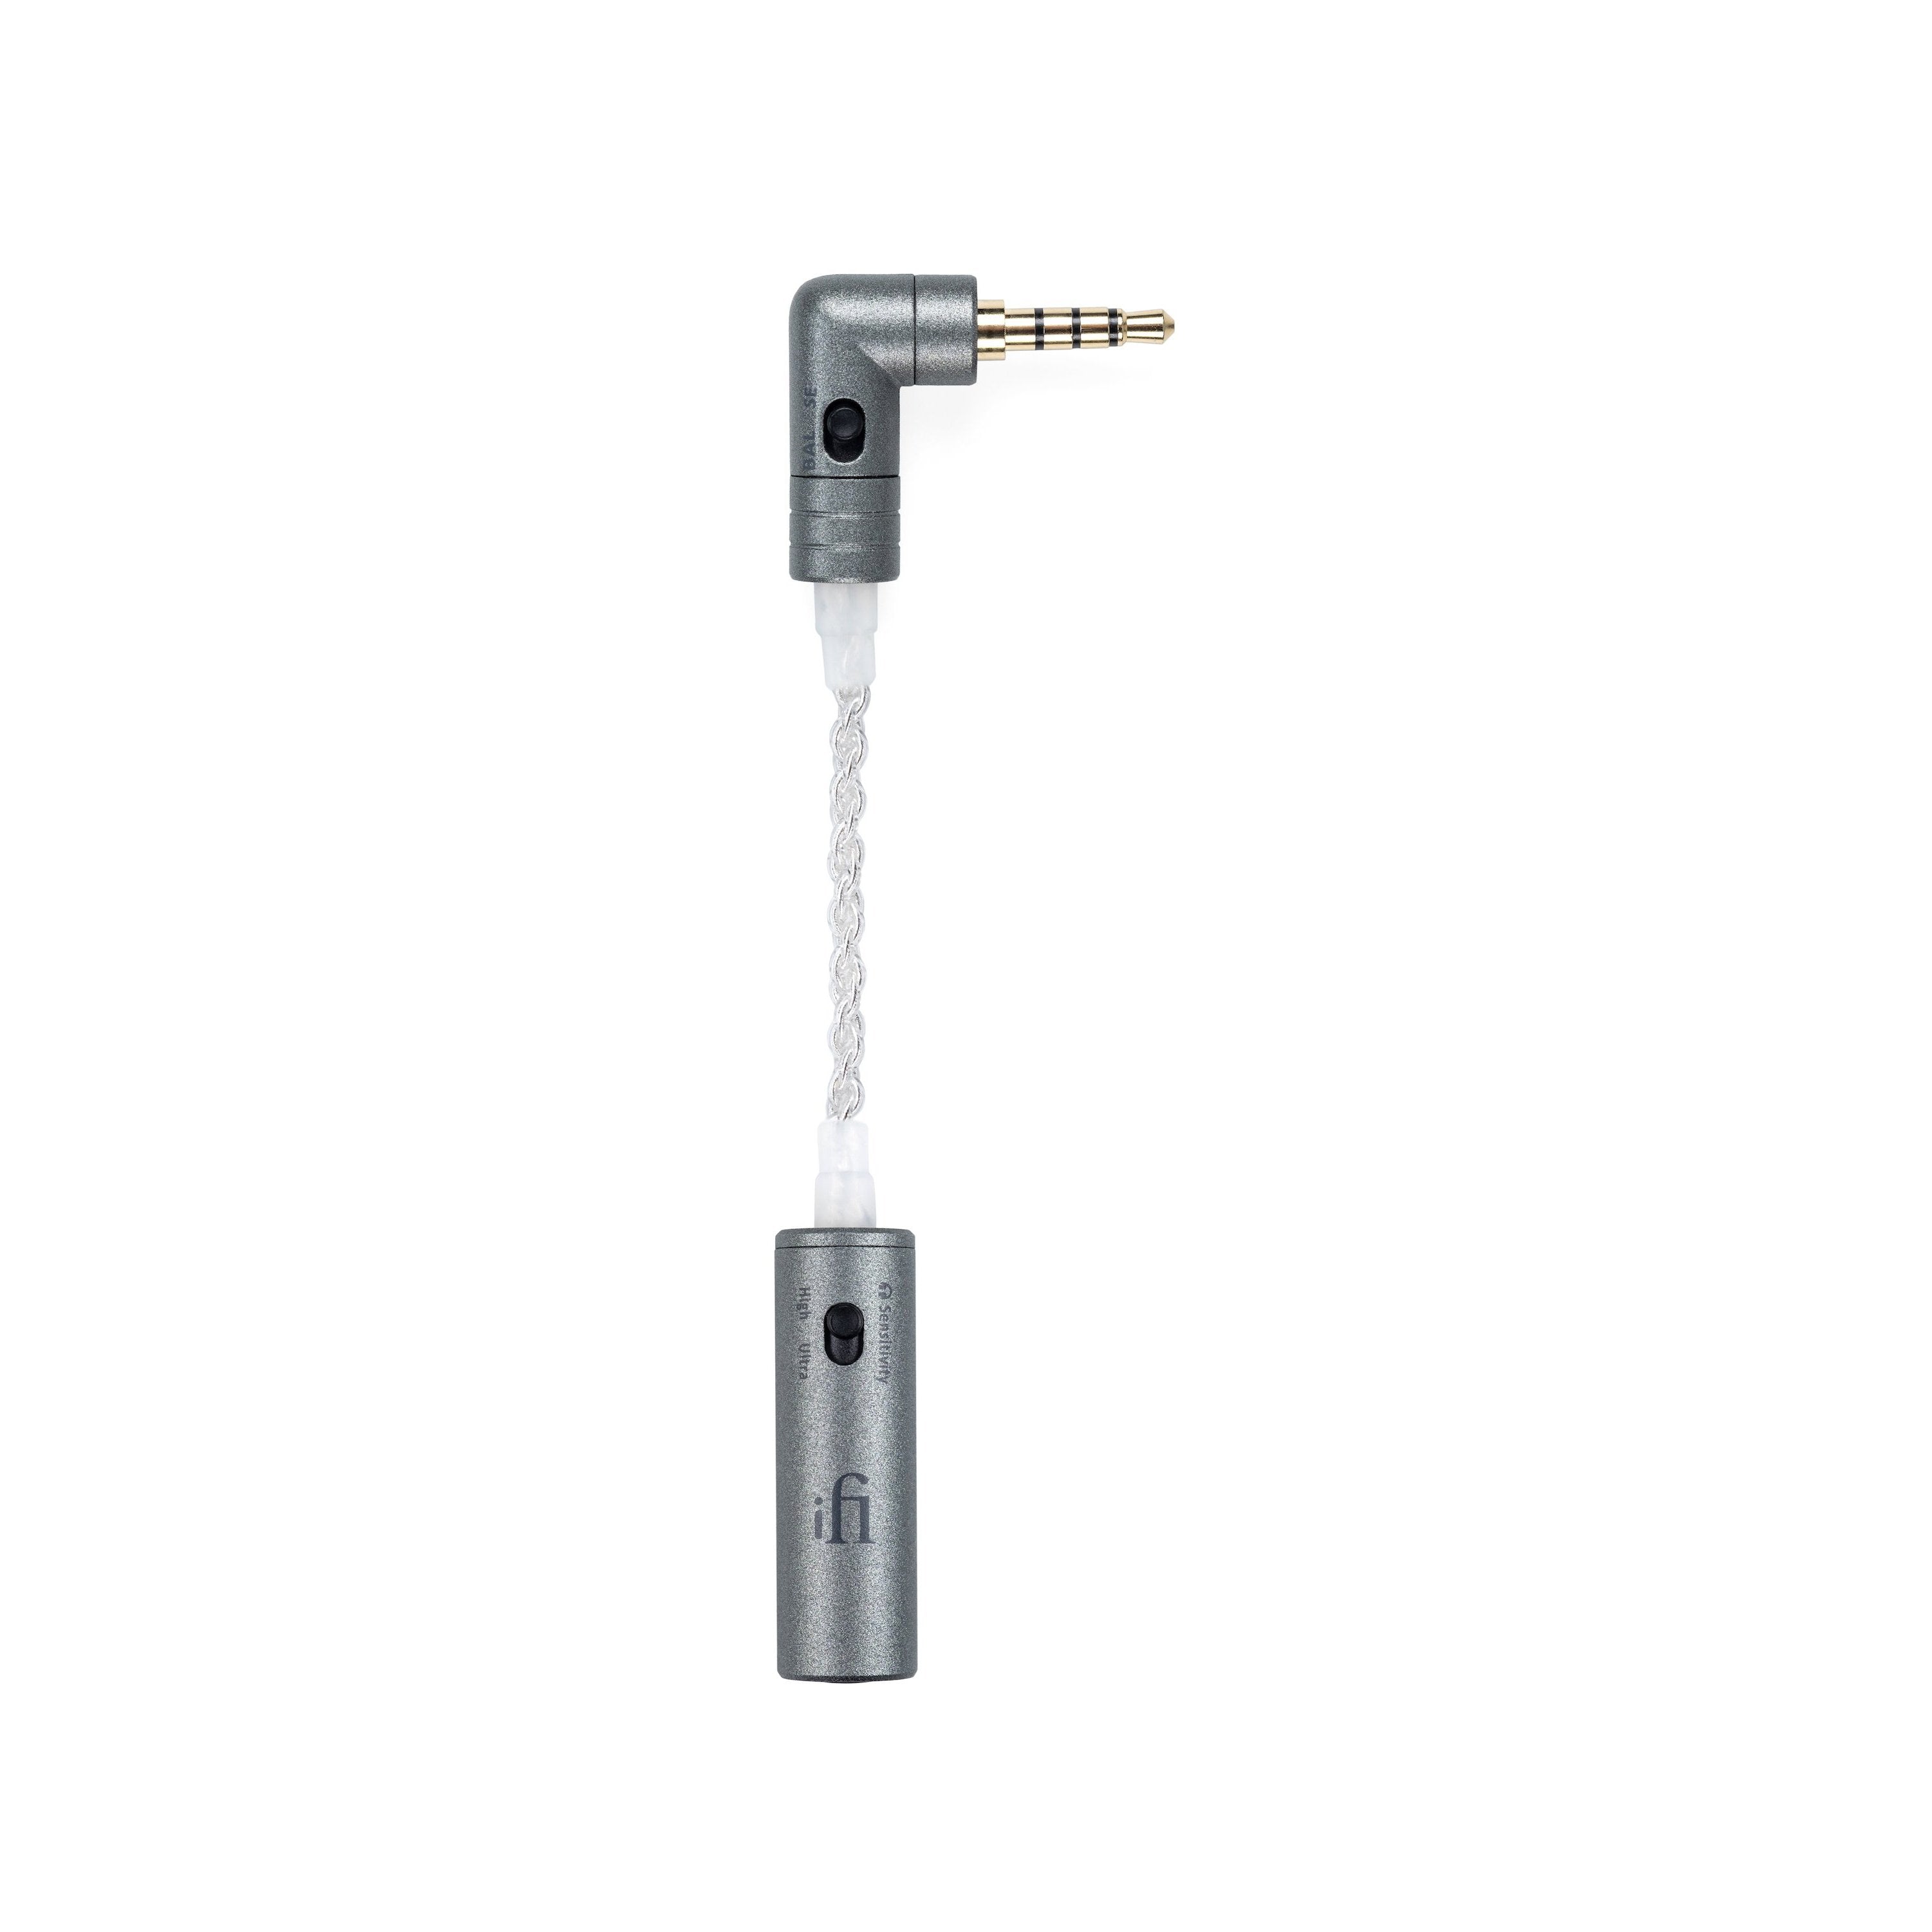 Headphone Adapter 2.5mm to 4.4mm by iFi audio - Convert your 2.5mm  headphones to fit 4.4mm Balanced outputs.